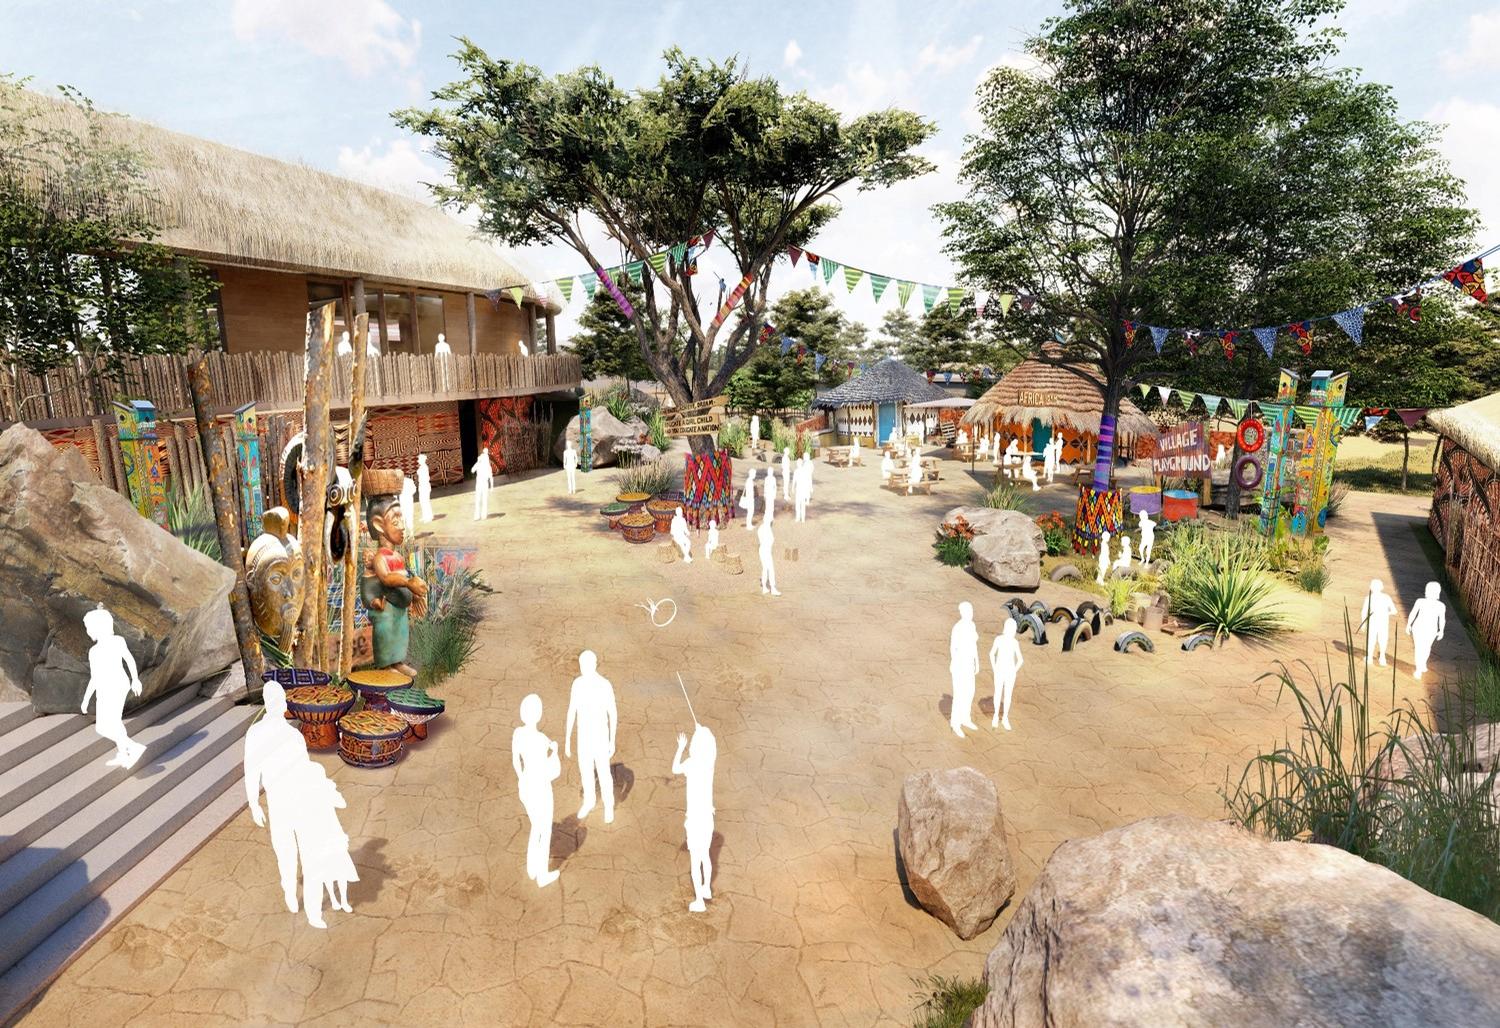 Existing buildings will be transformed into 28 lodges,14 tents and a restaurant, which gives visitors a view of the new area